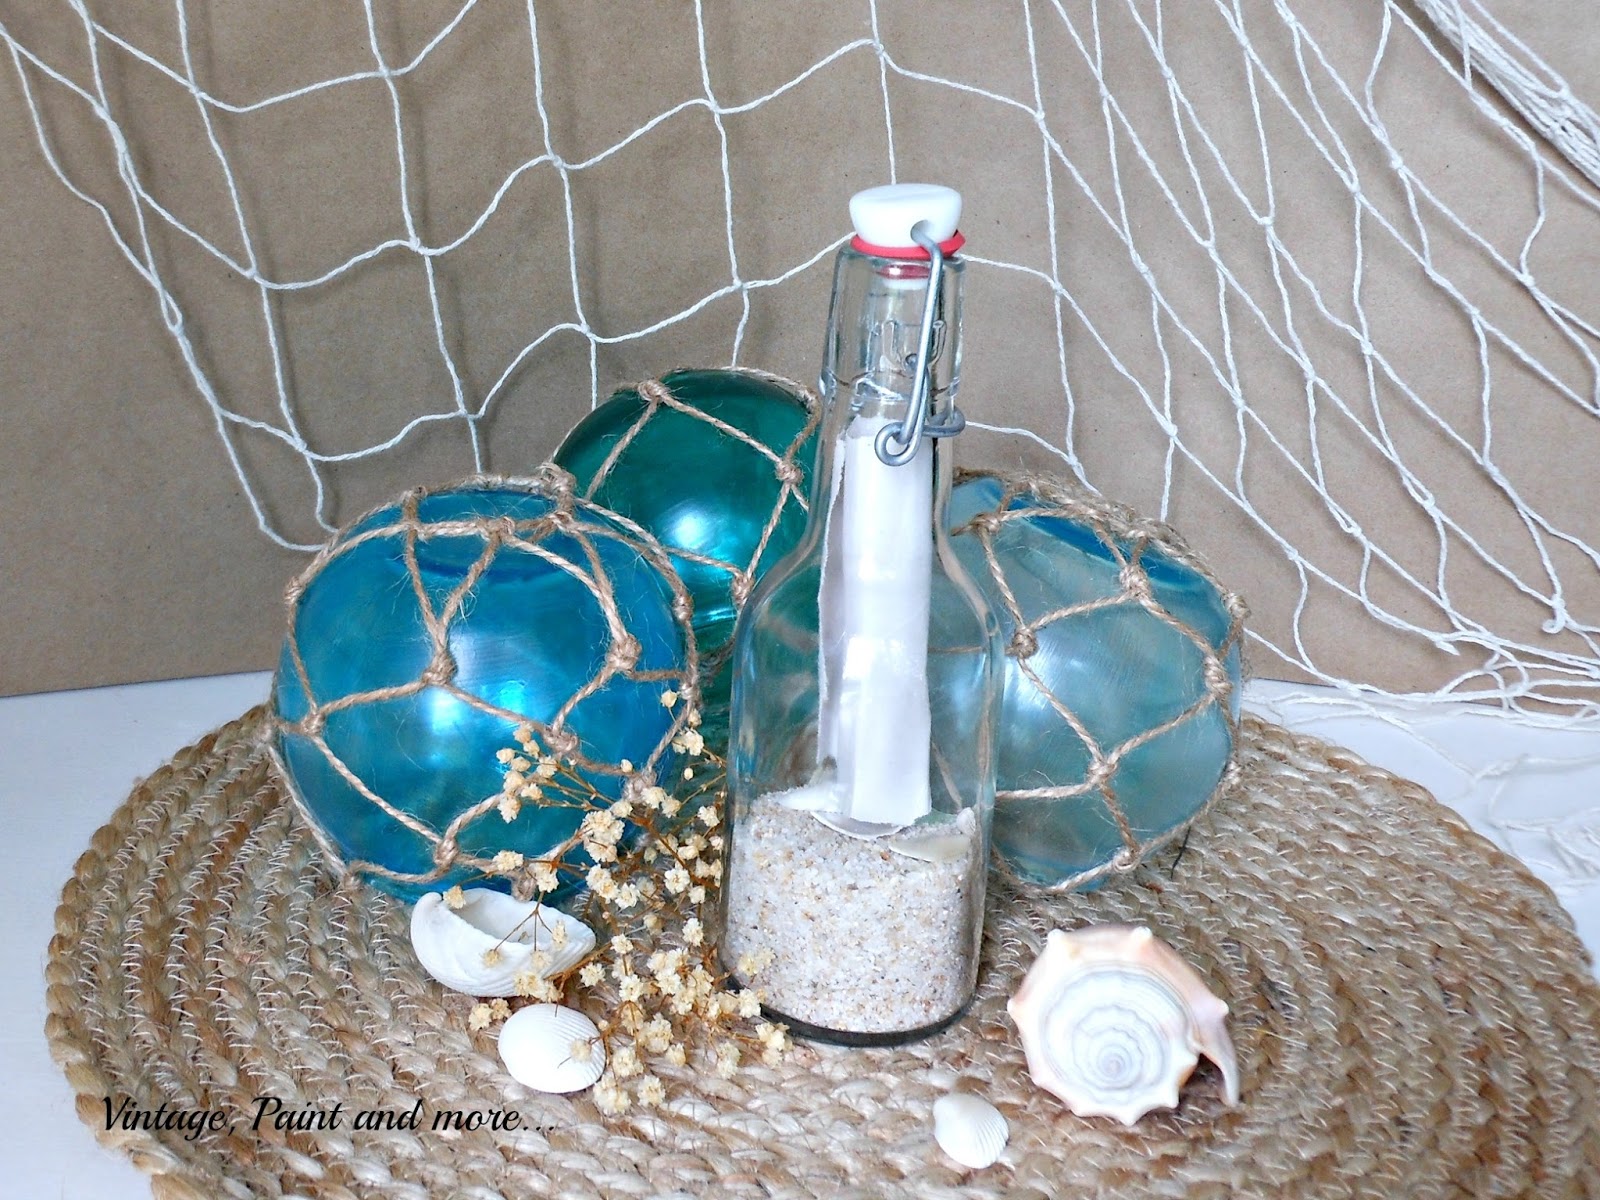 Vintage, Paint and more... crafts with mod podge, dollar tree crafts, faux sea glass craft